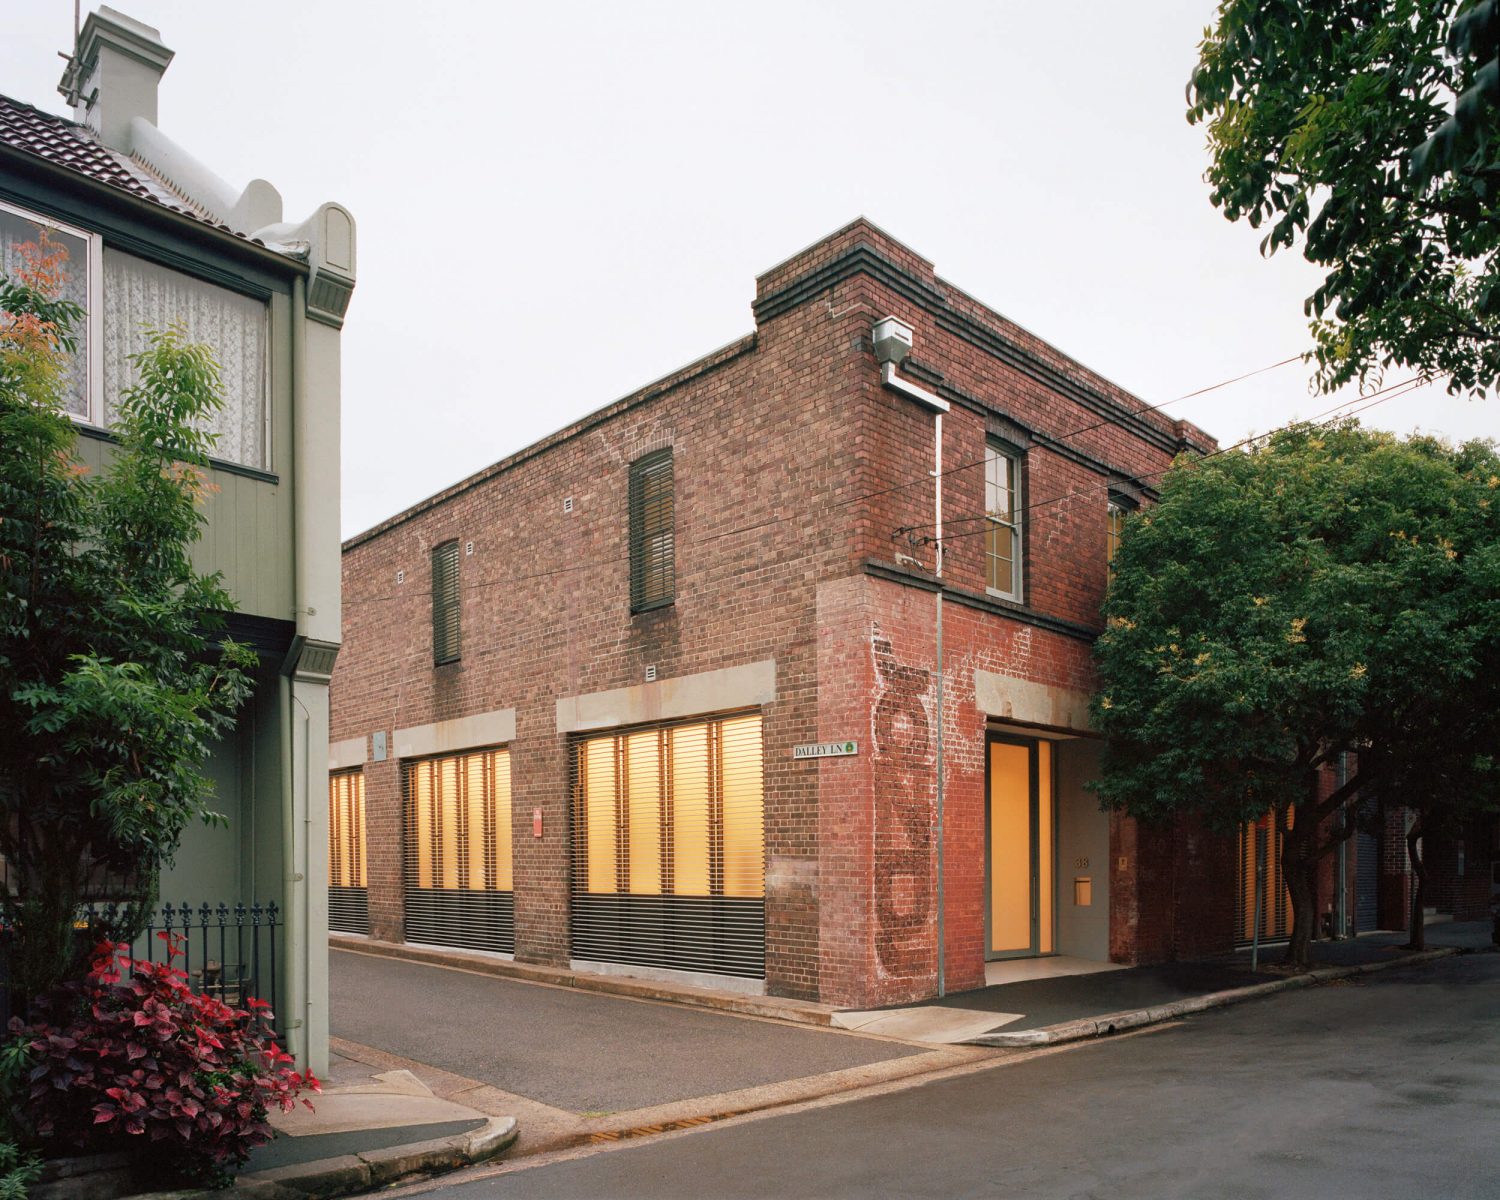 Redfern Warehouse by Ian Moore Architects